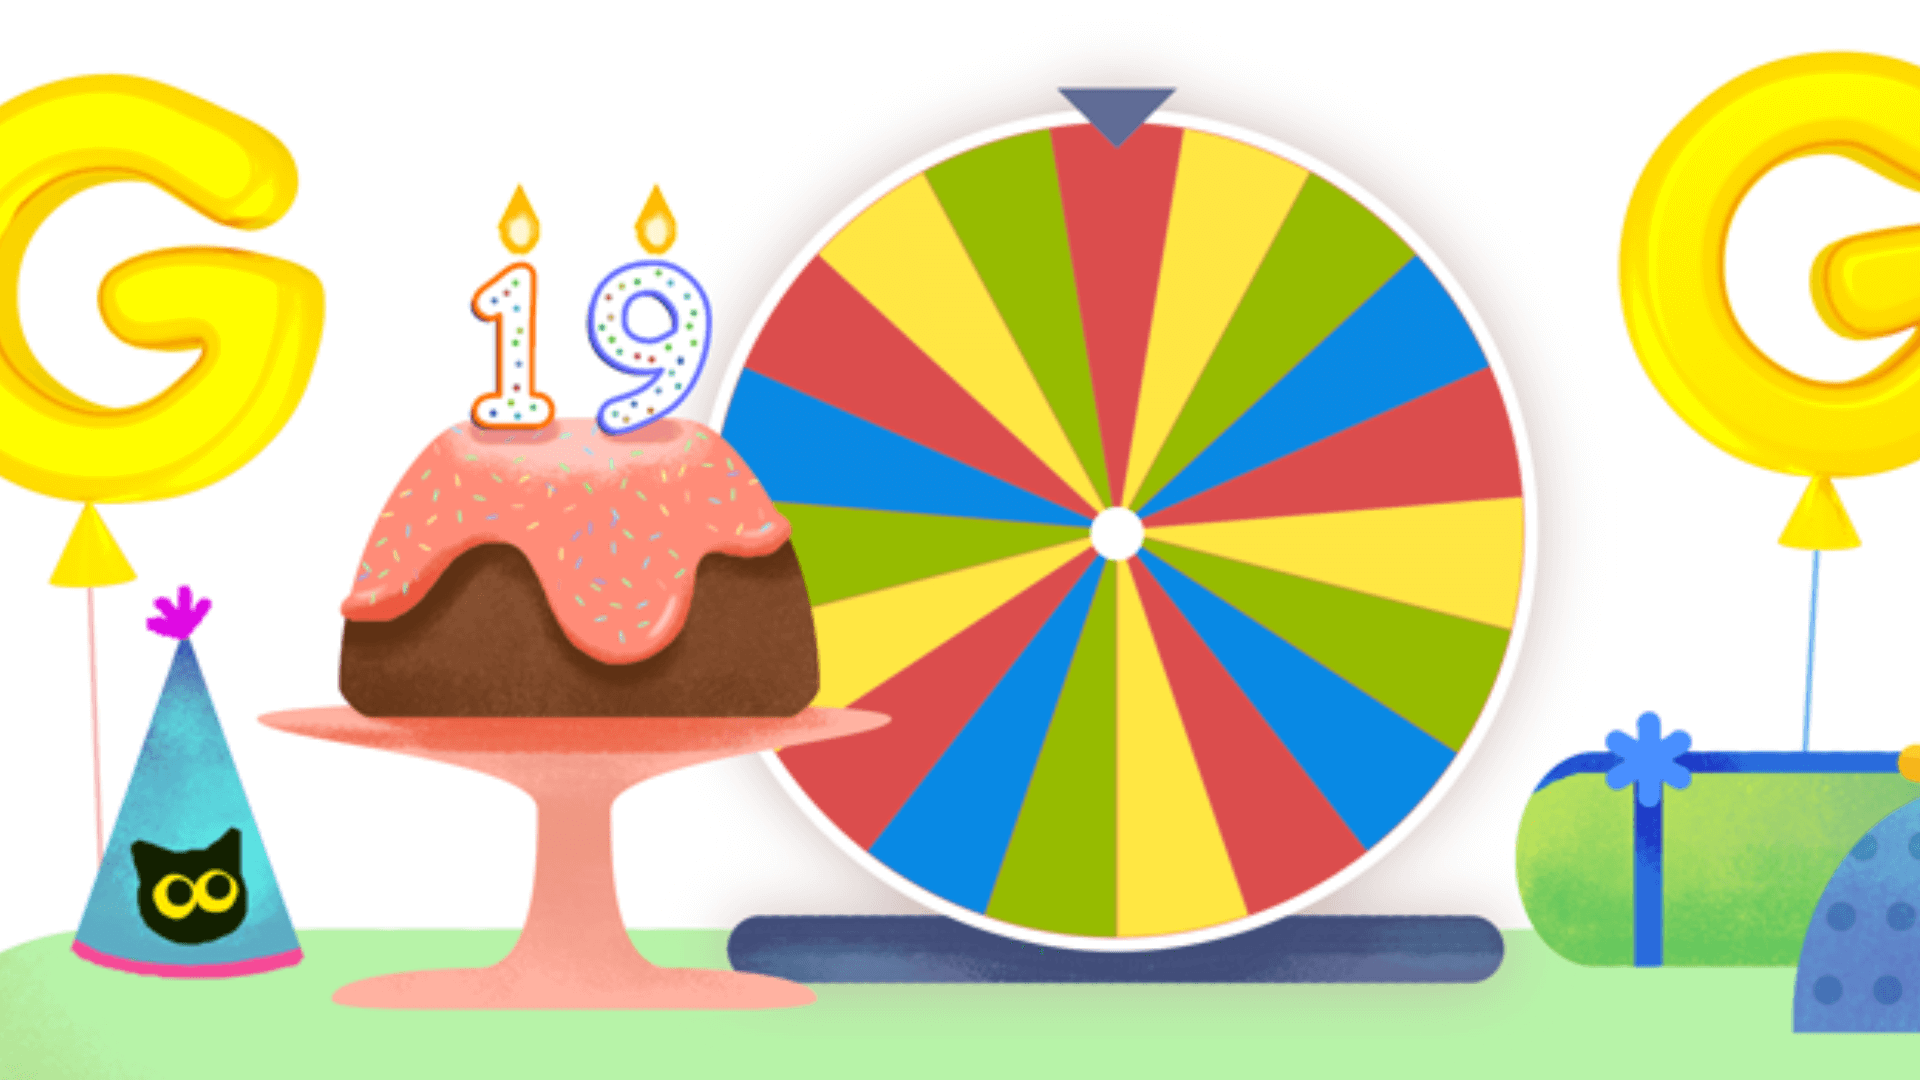 Google marks its 19th birthday with a 'Google birthday surprise spinner' doodle ...